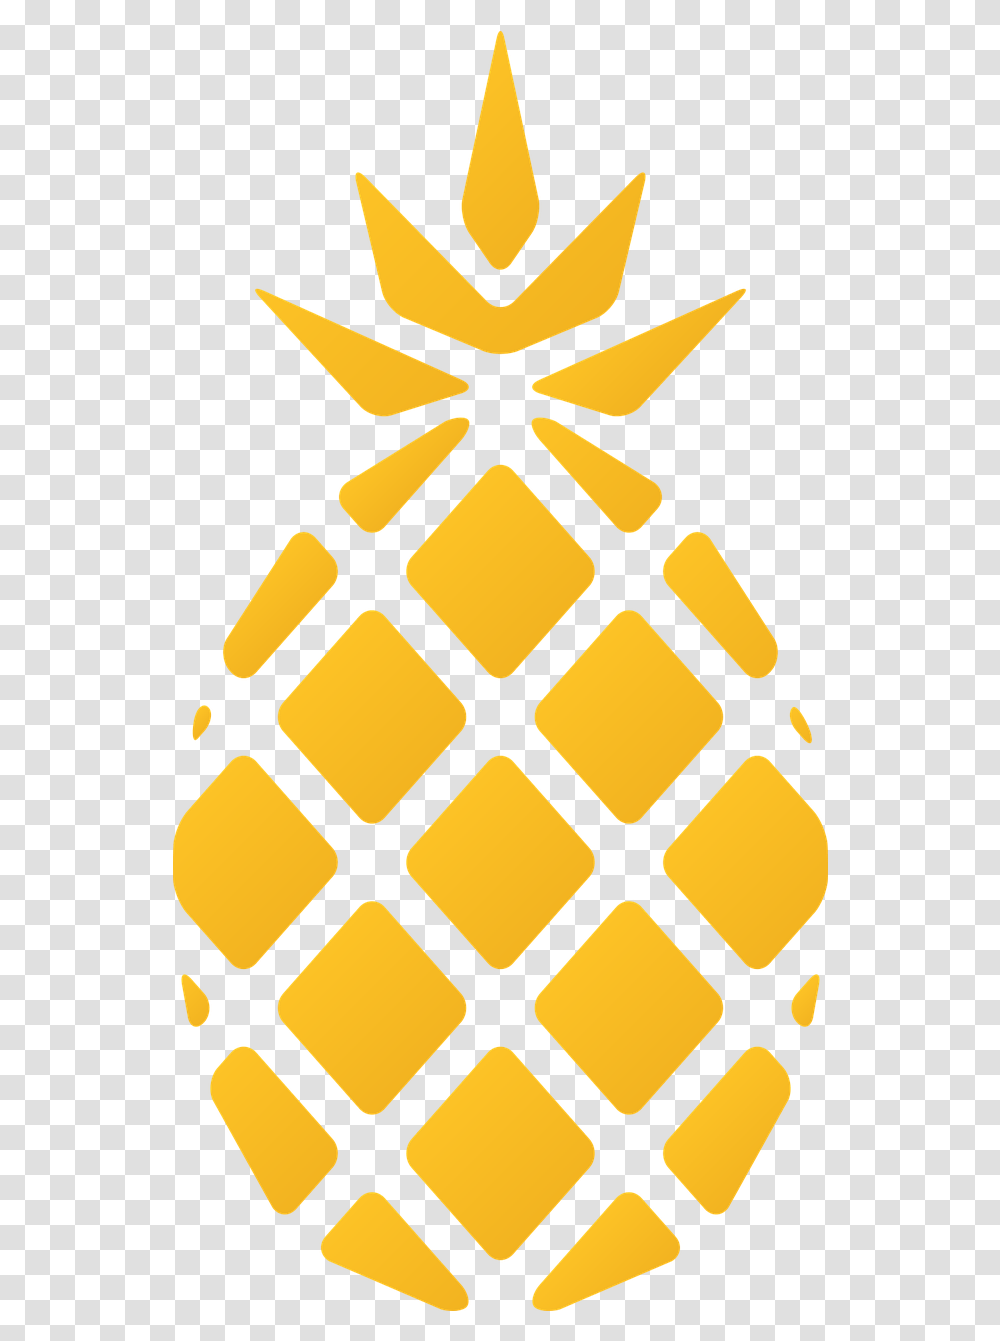 Pineapple Fruit Logo Food Tropical Pineapple Stamp, Grenade, Bomb, Weapon, Weaponry Transparent Png